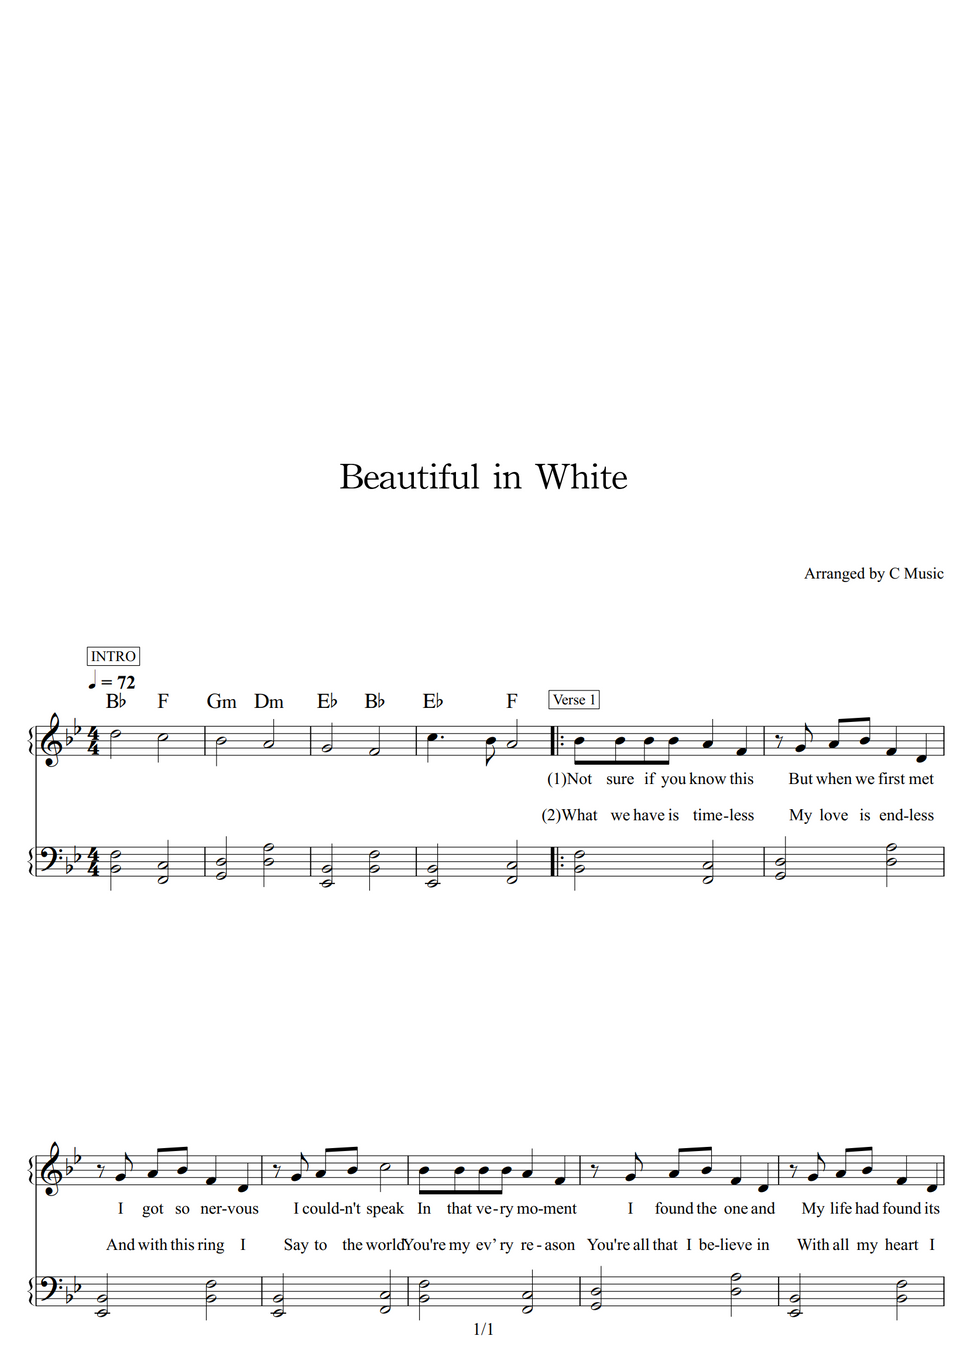 Westlife - Beautiful in White (Easy Version) by C Music